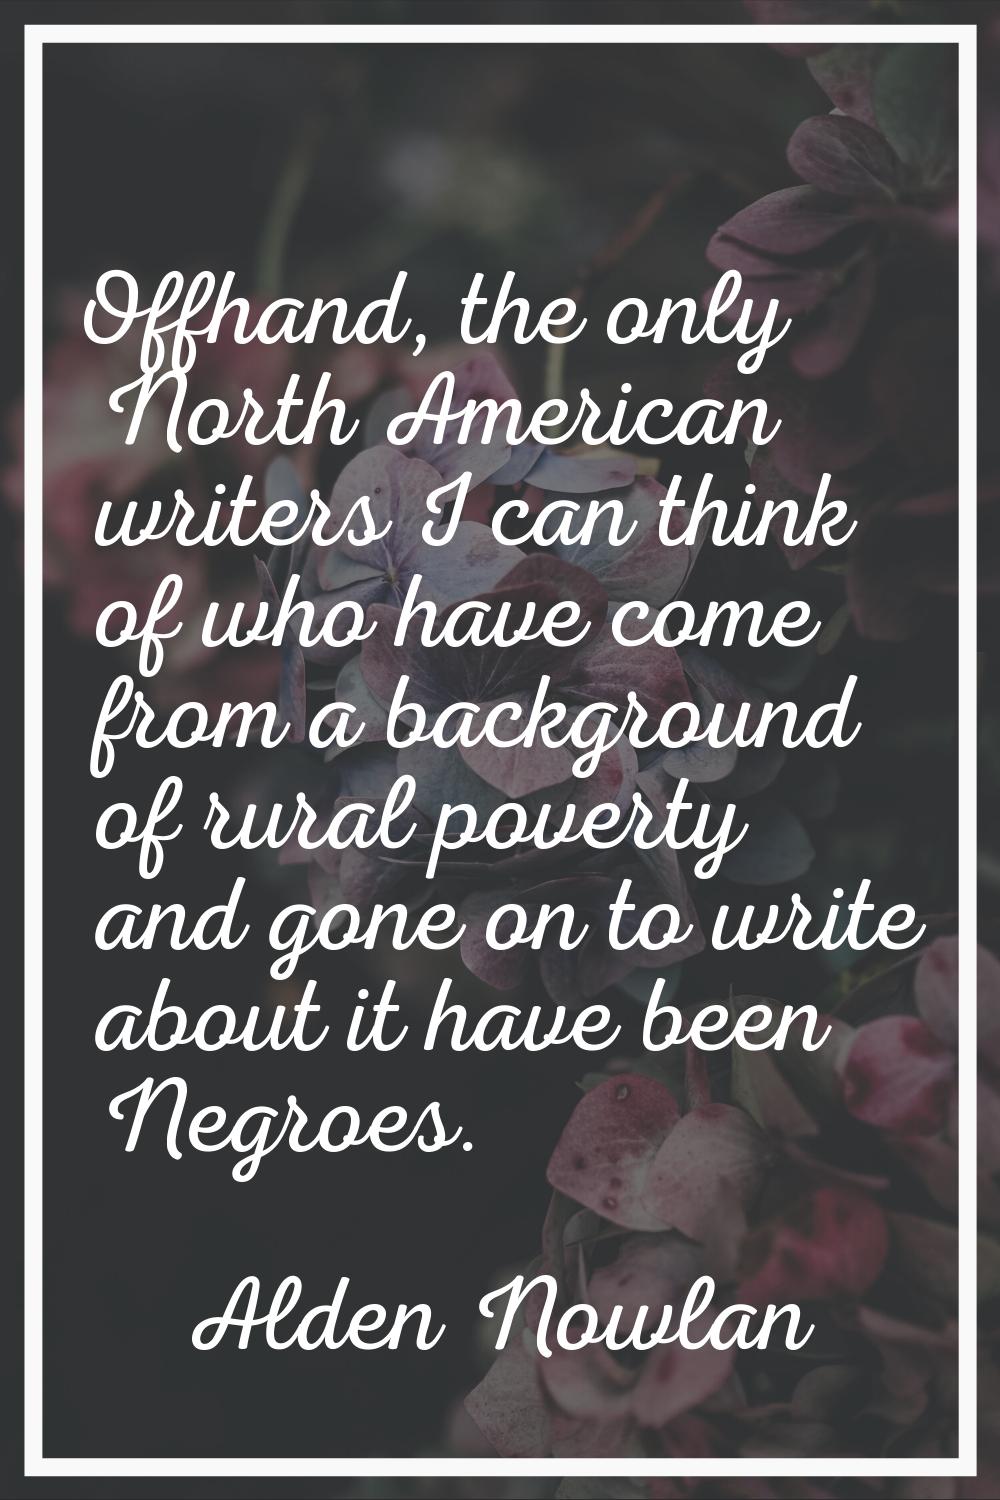 Offhand, the only North American writers I can think of who have come from a background of rural po